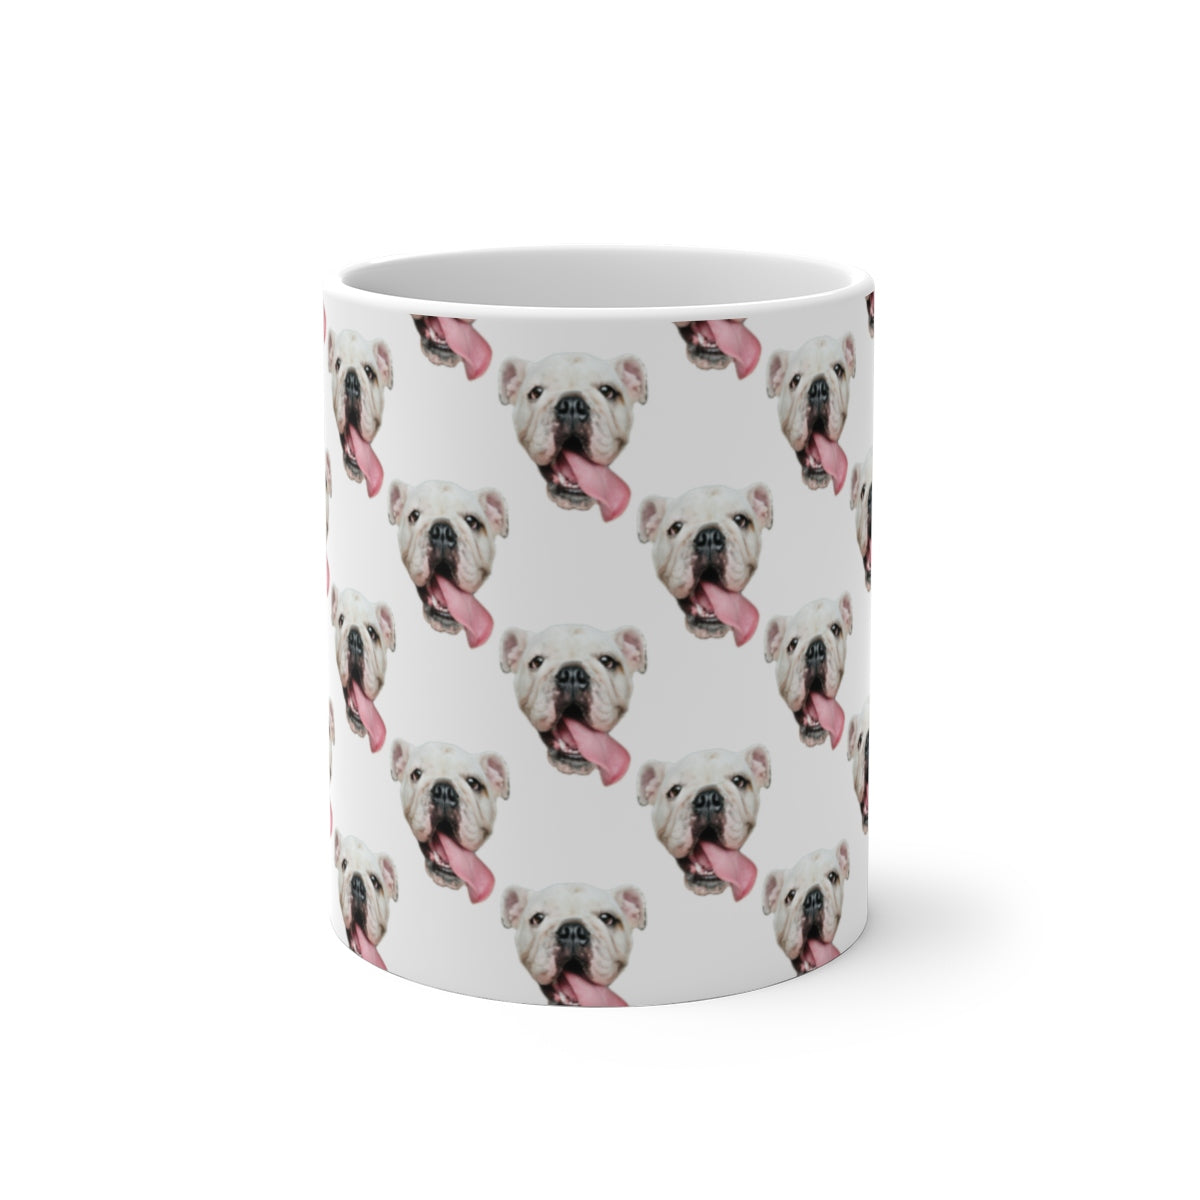 Color Changing Mug, Custom Photo Pattern Magic Mug, Heat Change Unique Personalized Gift for Him Her Friend Family Cat Dog Baby Mom Dad Gift Starcove Fashion